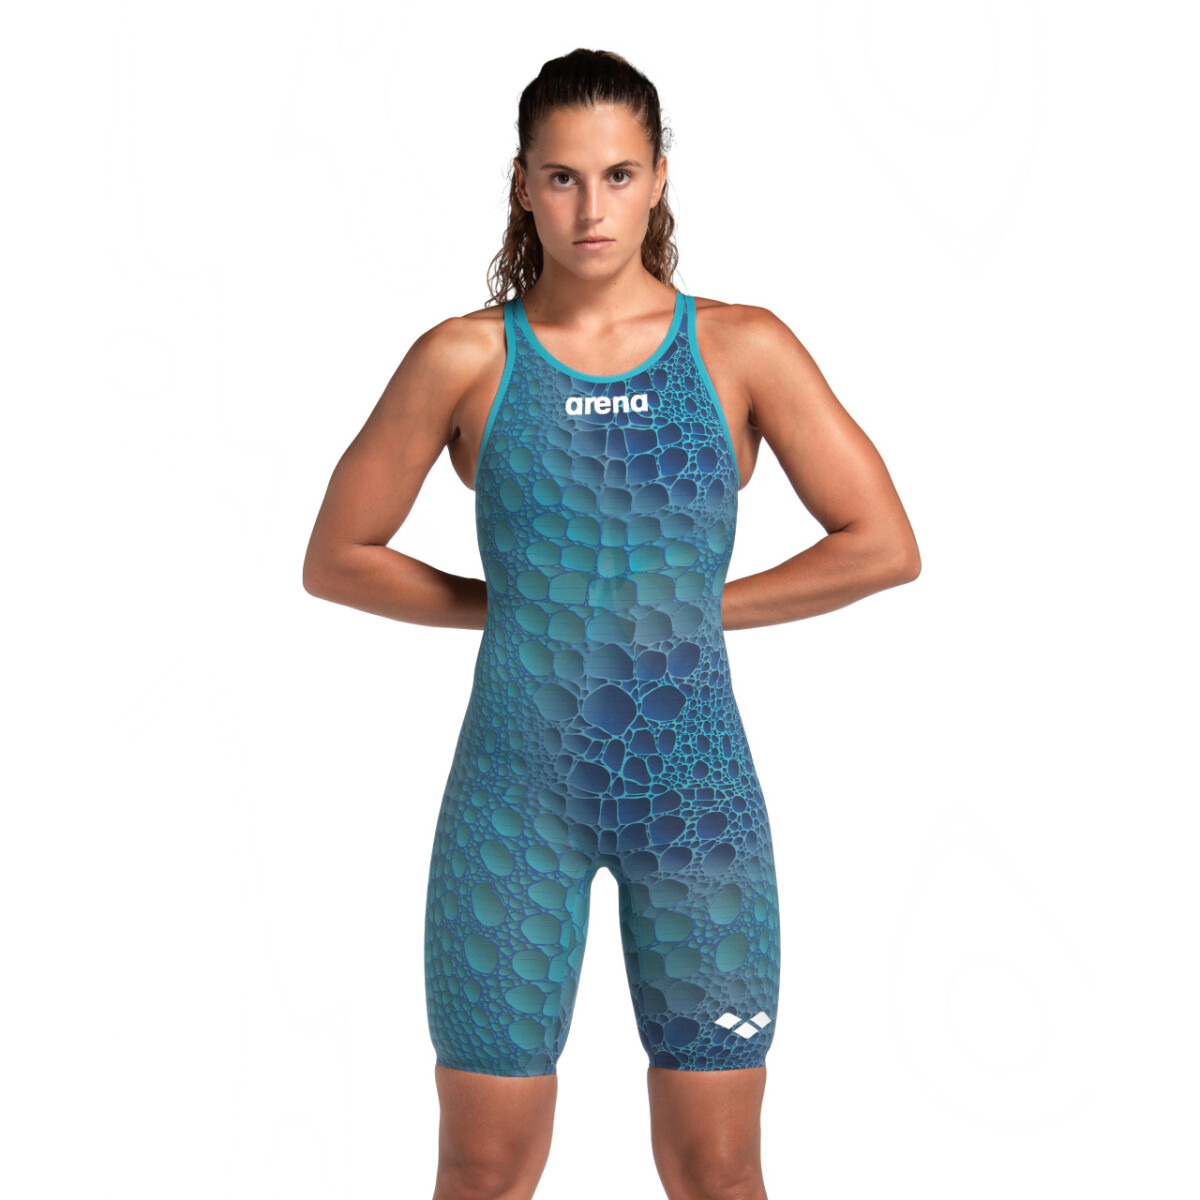 Malla De Competicion Para Mujer Arena Women's Powerskin Carbon Air2 Limited Edition Open Back - Abyss Caimano 